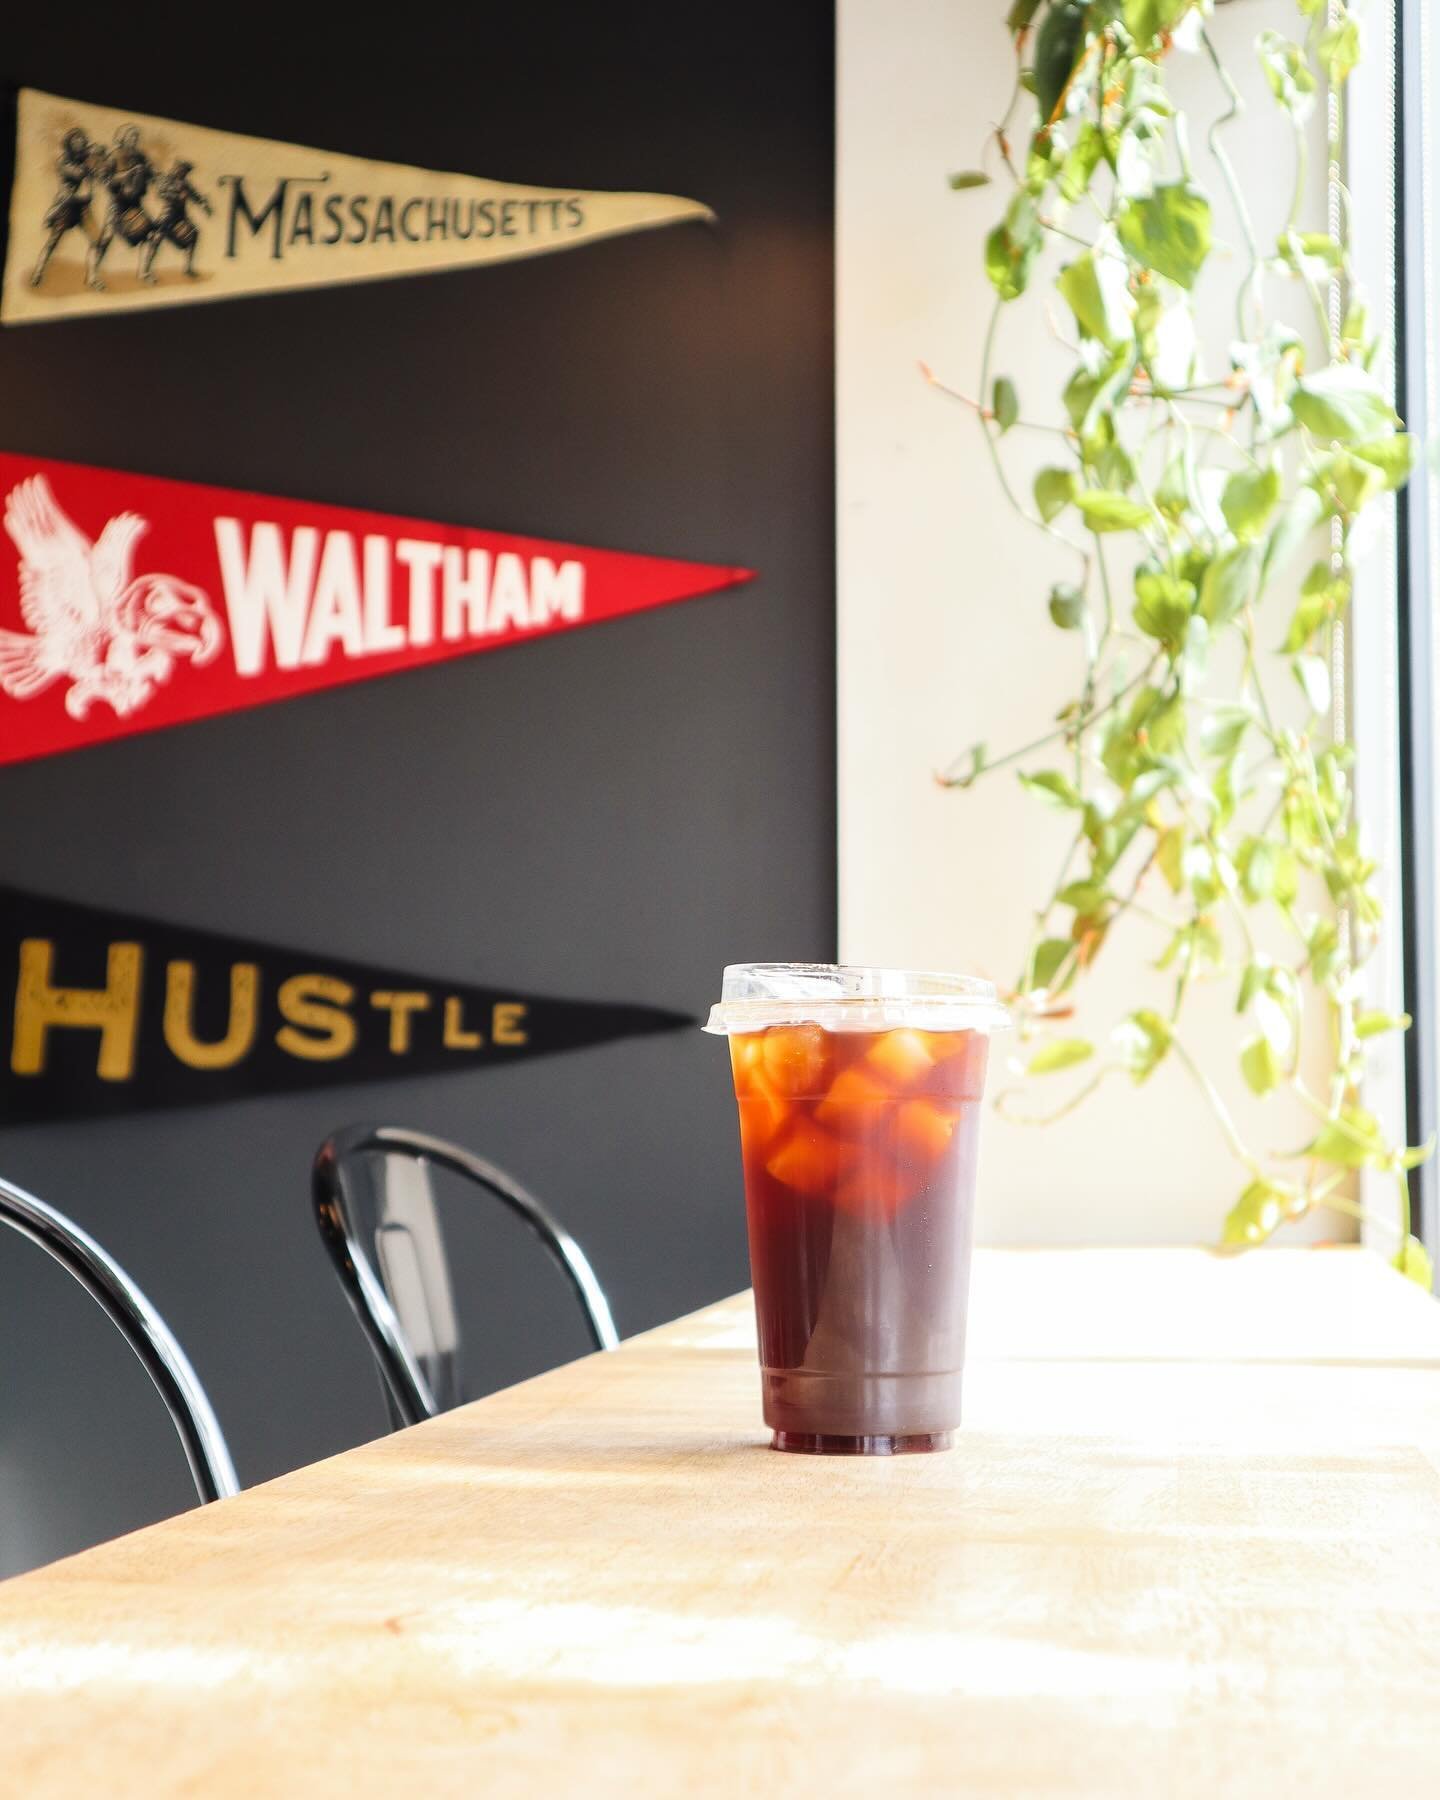 Happy Patriots Day and Marathon Monday! Good luck to all the runners! Stop by and grab some iced coffee and enjoy this perfect day! 

______________
#marathonmonday #patriotsday #bostonmarathon #hustle #massachusetts #waltham #espresso #coffeeshop #f